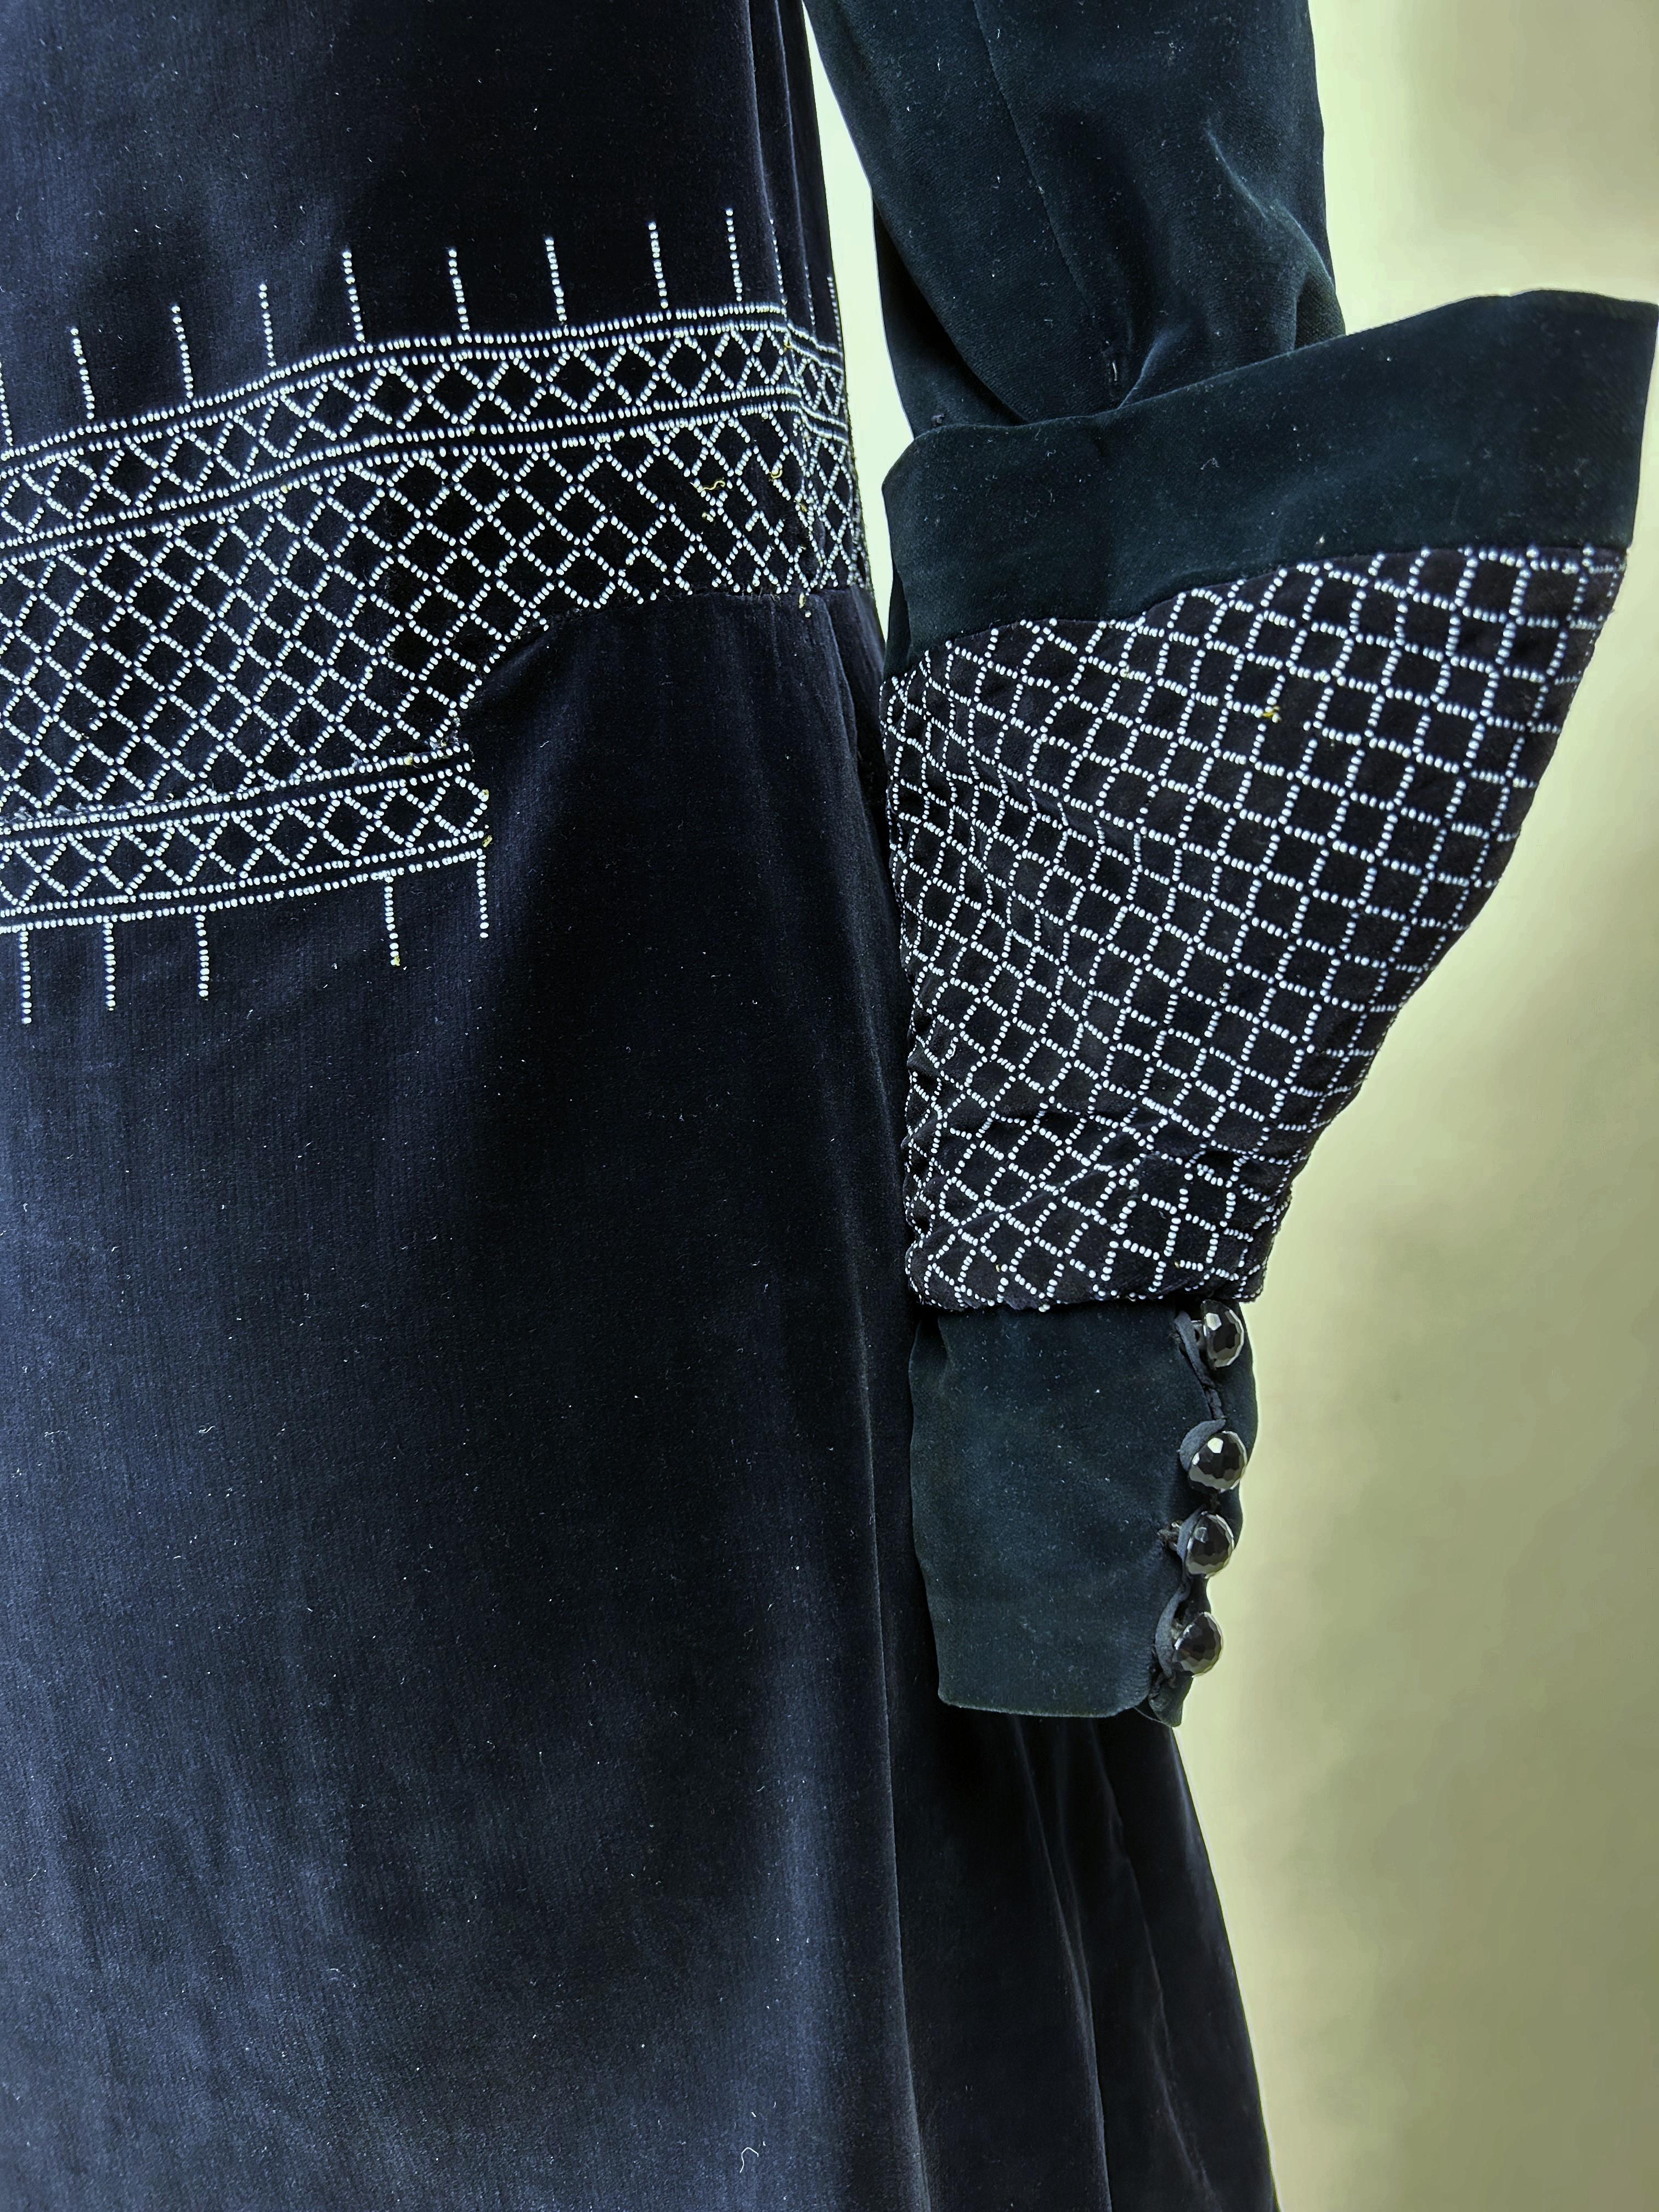 A Navy Velvet Sac Dress with glass beads embroideries - France Circa 1925-1930 For Sale 10